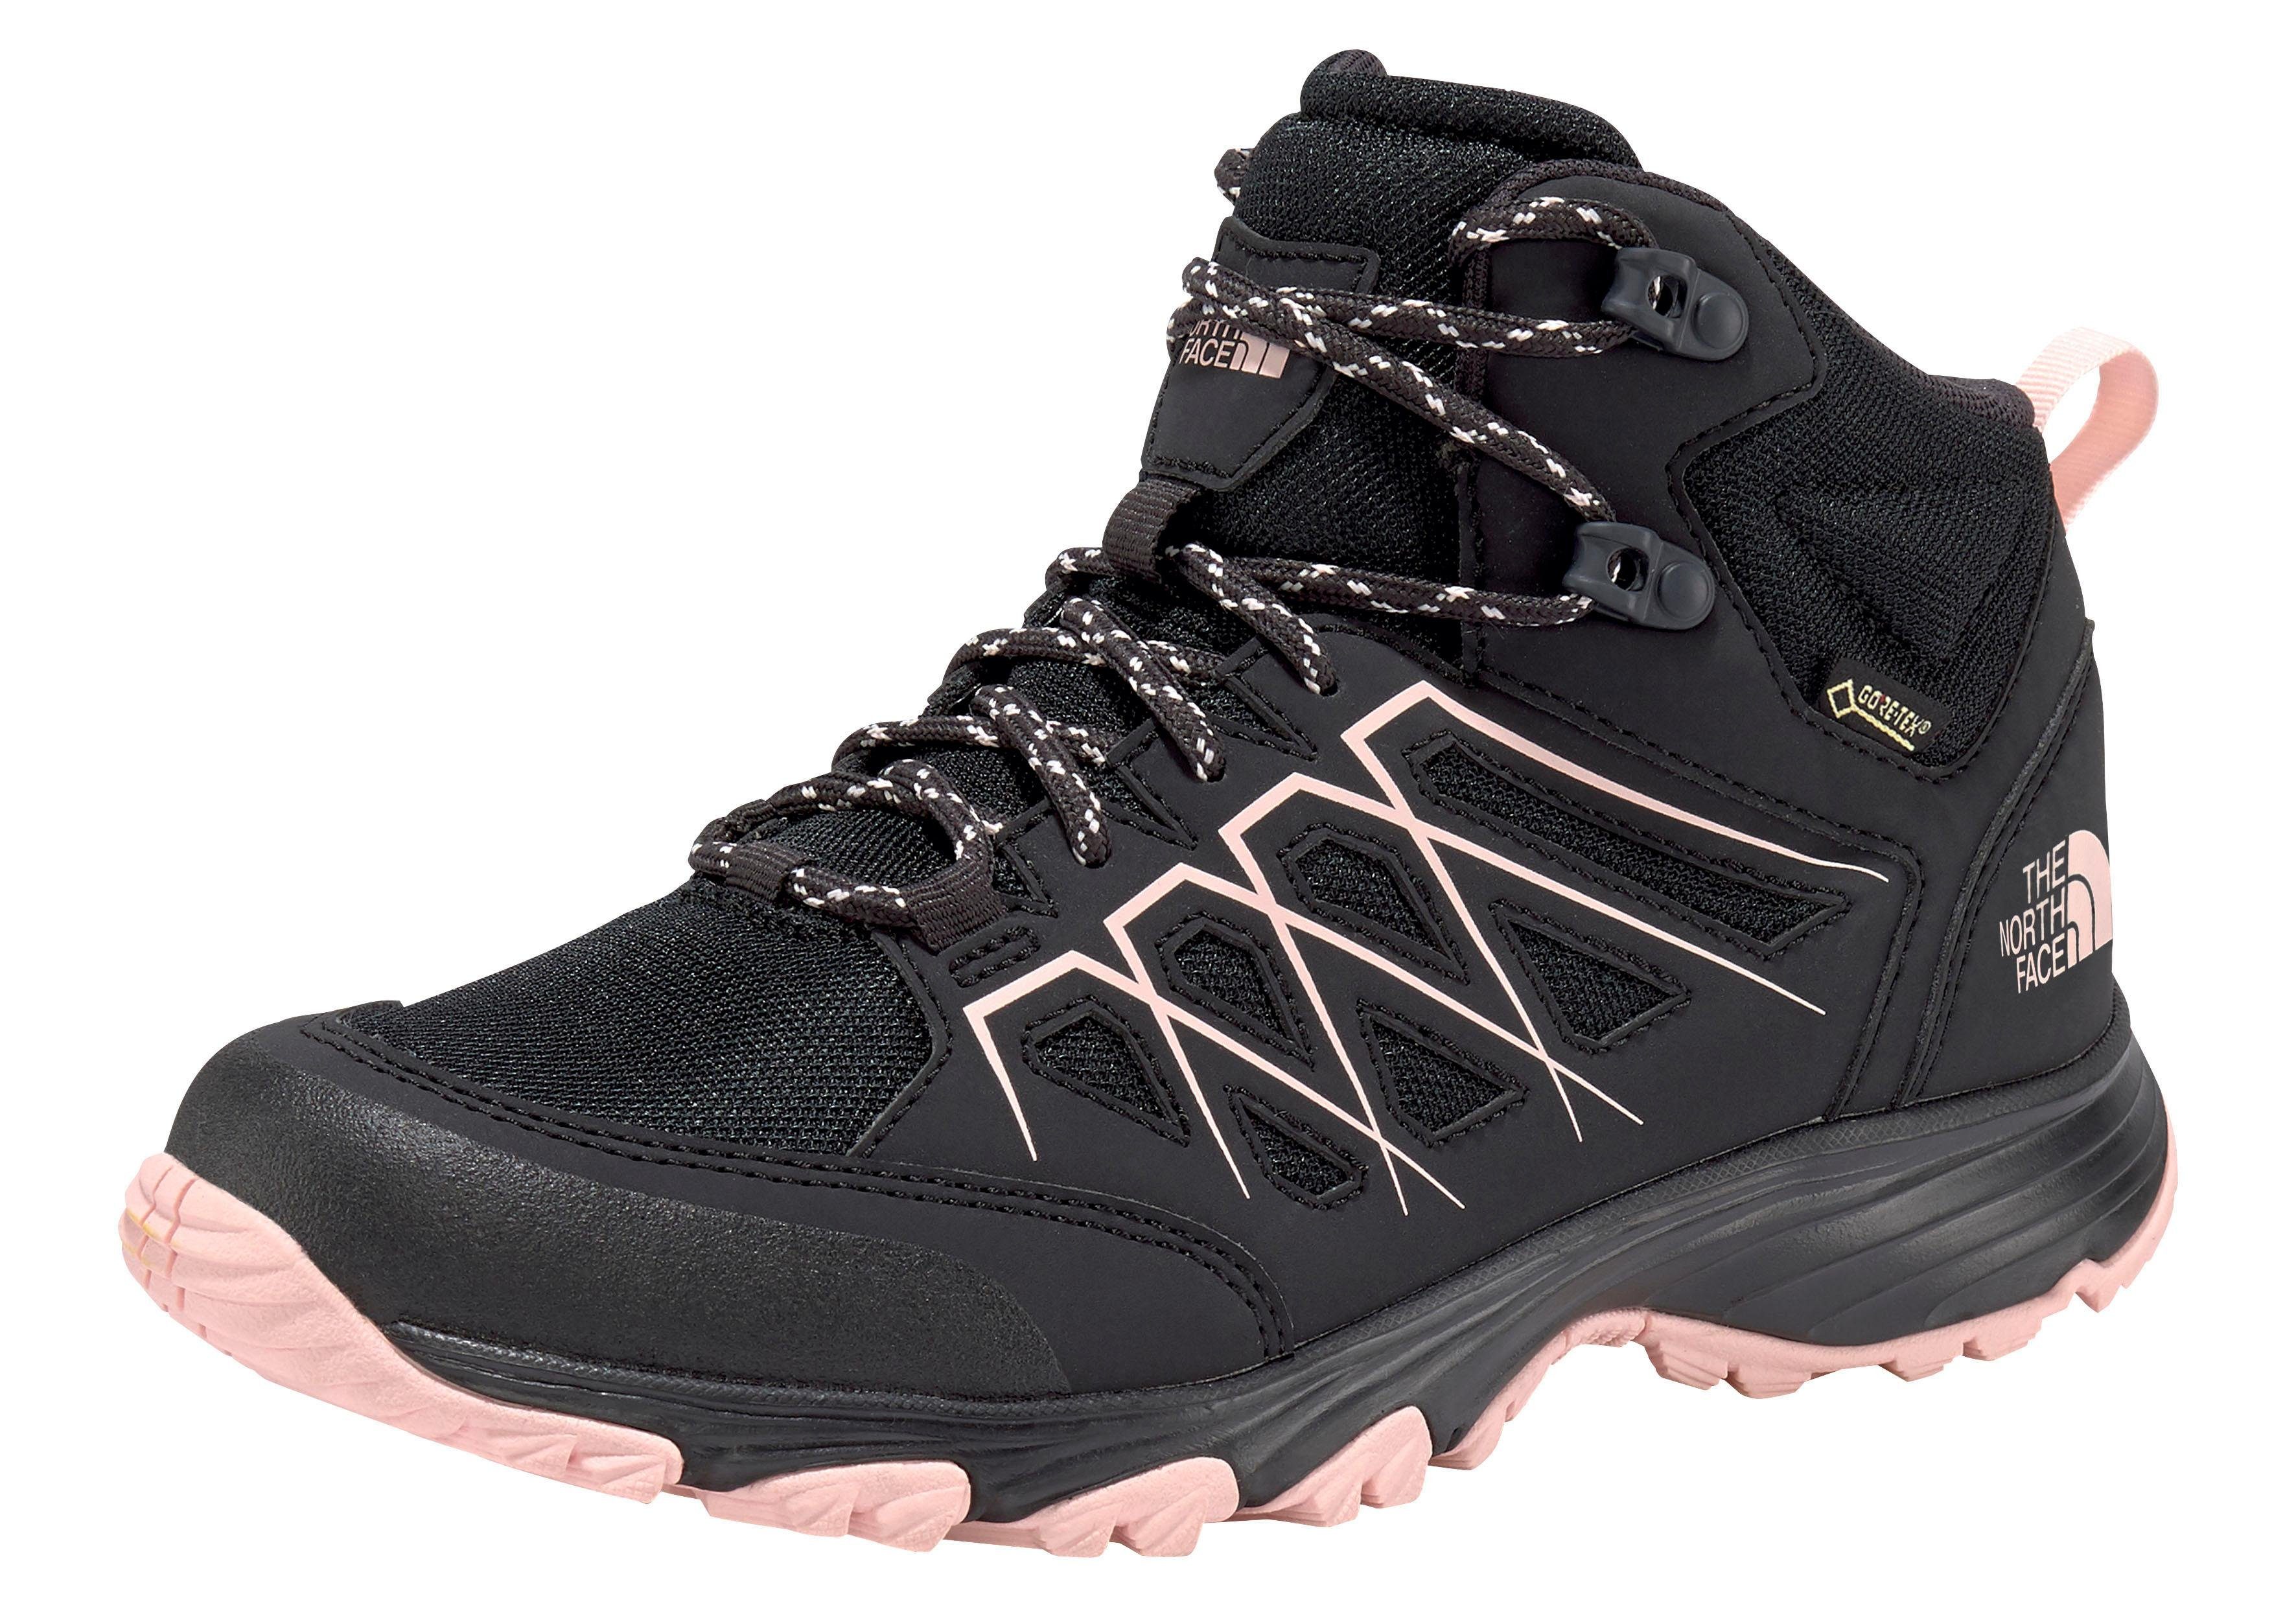 the north face venture fasthike gtx